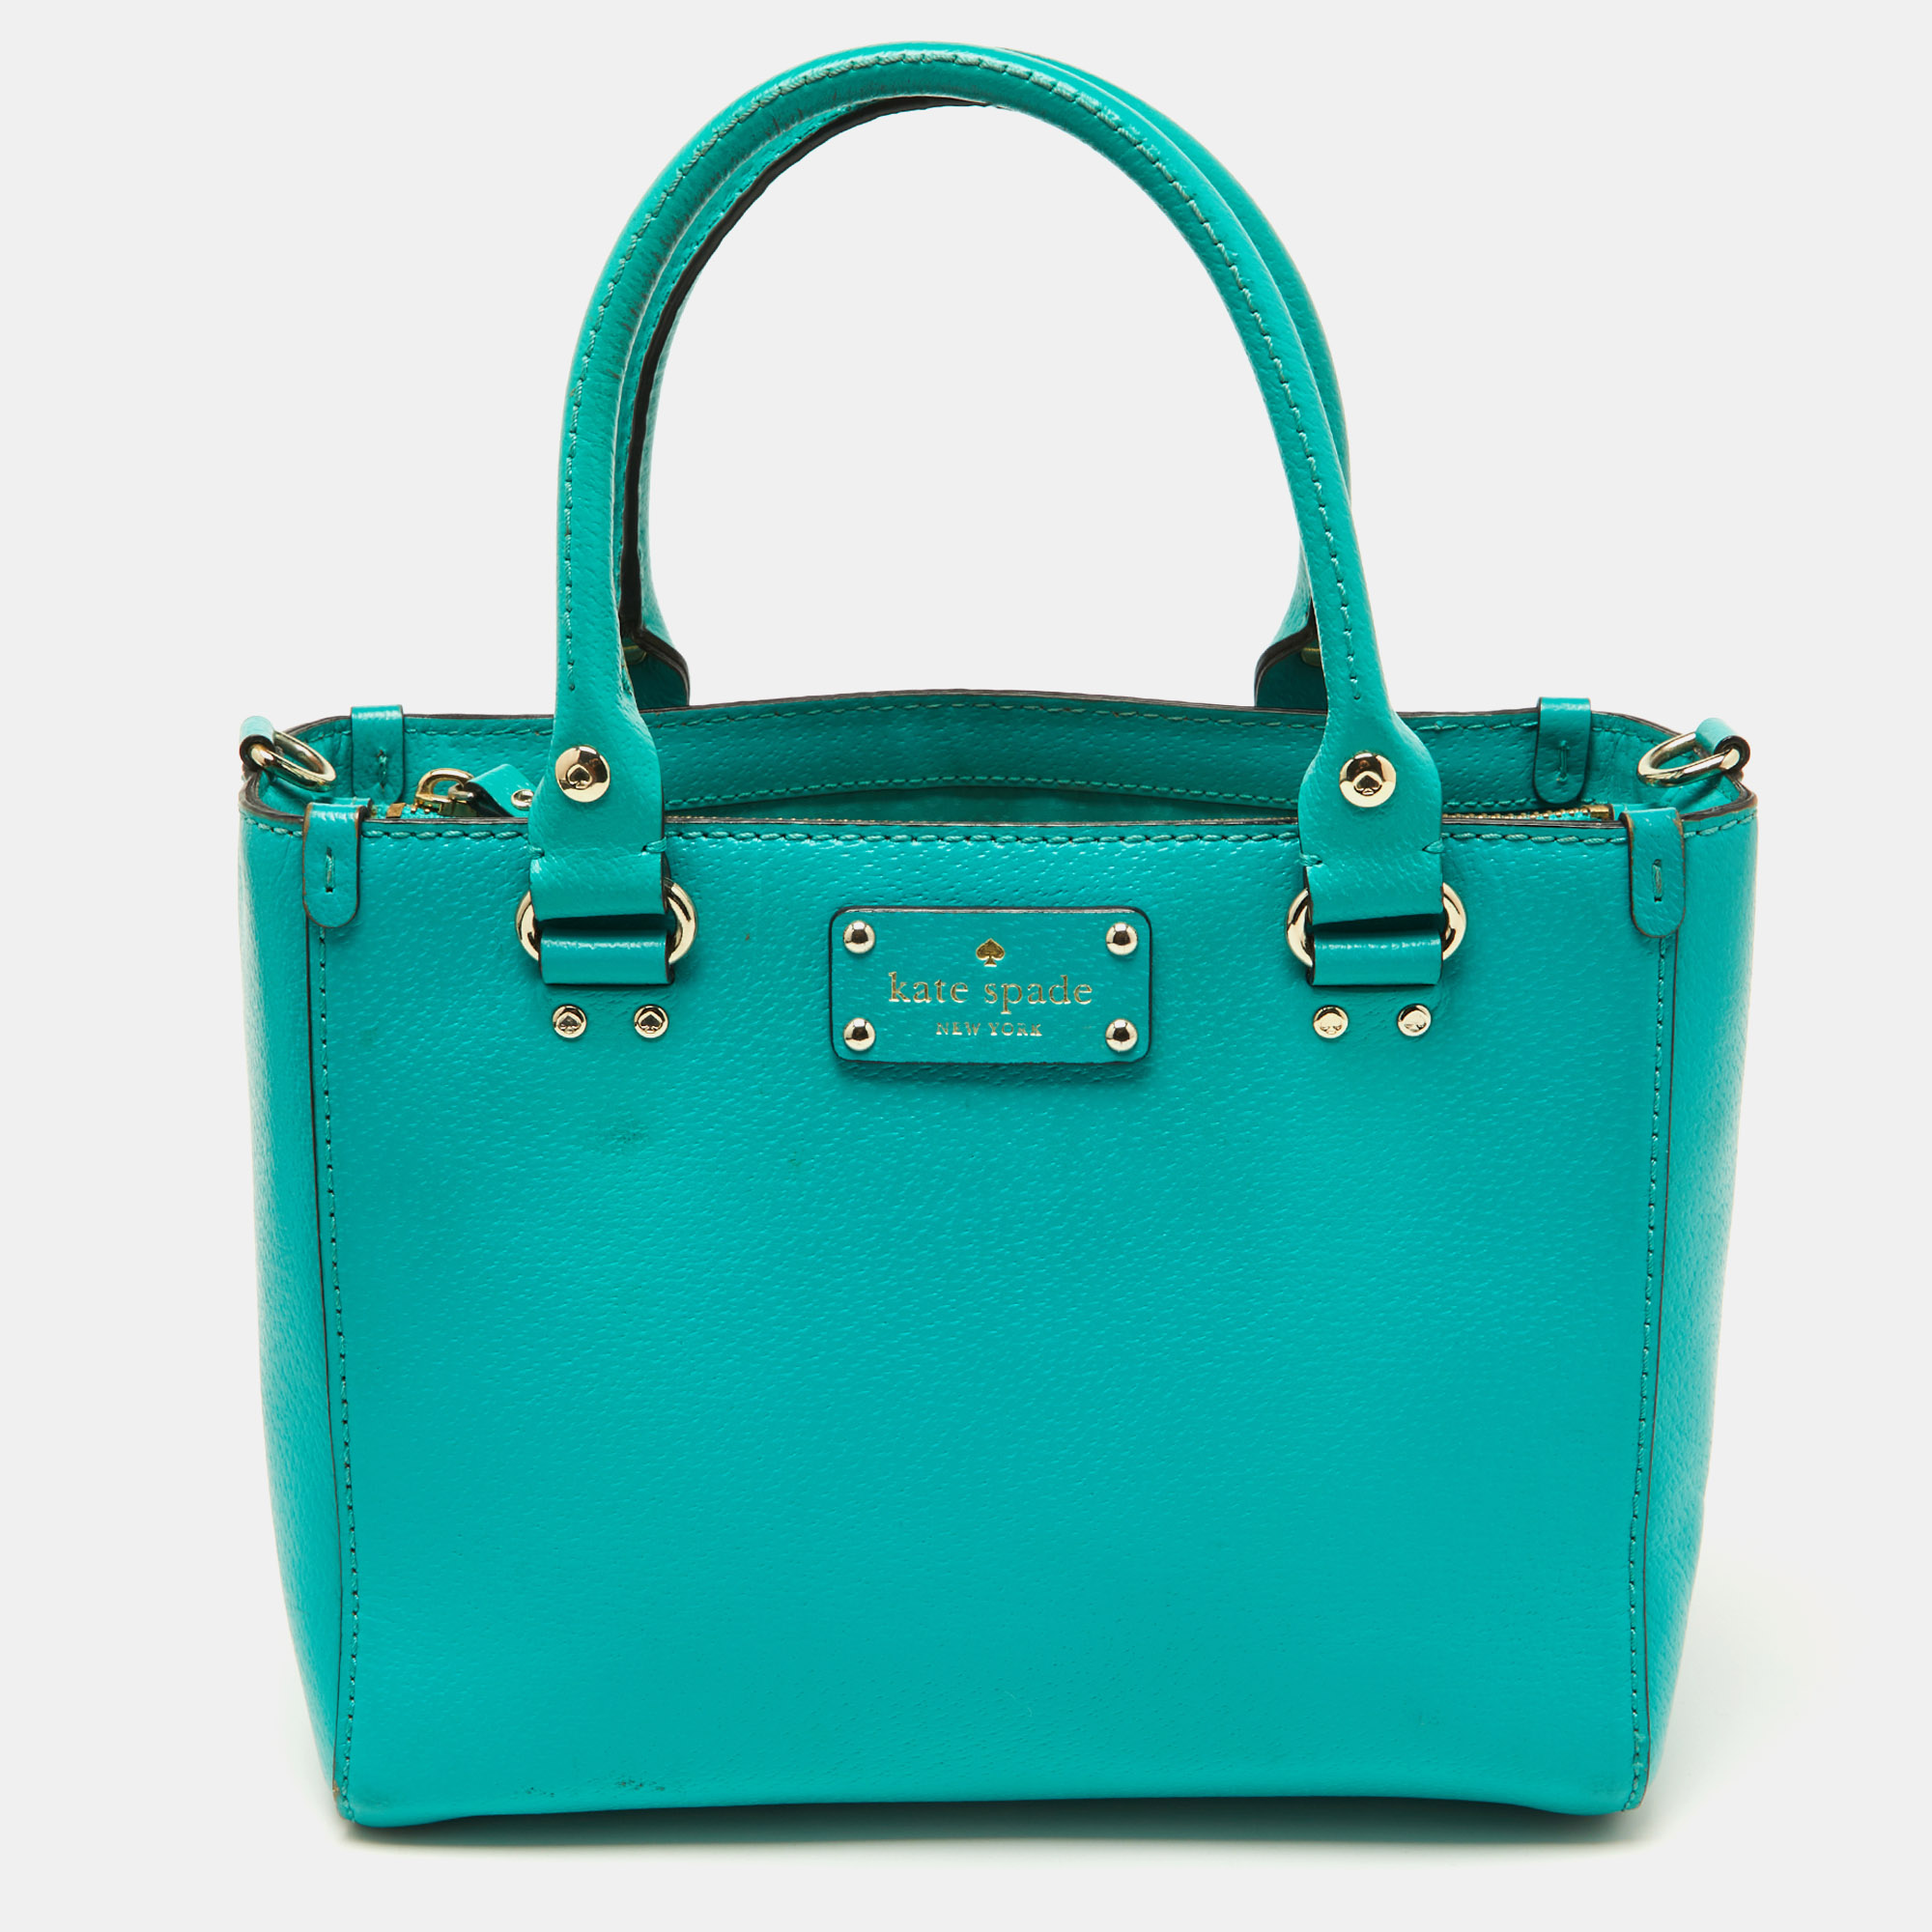 Kate spade green leather tote